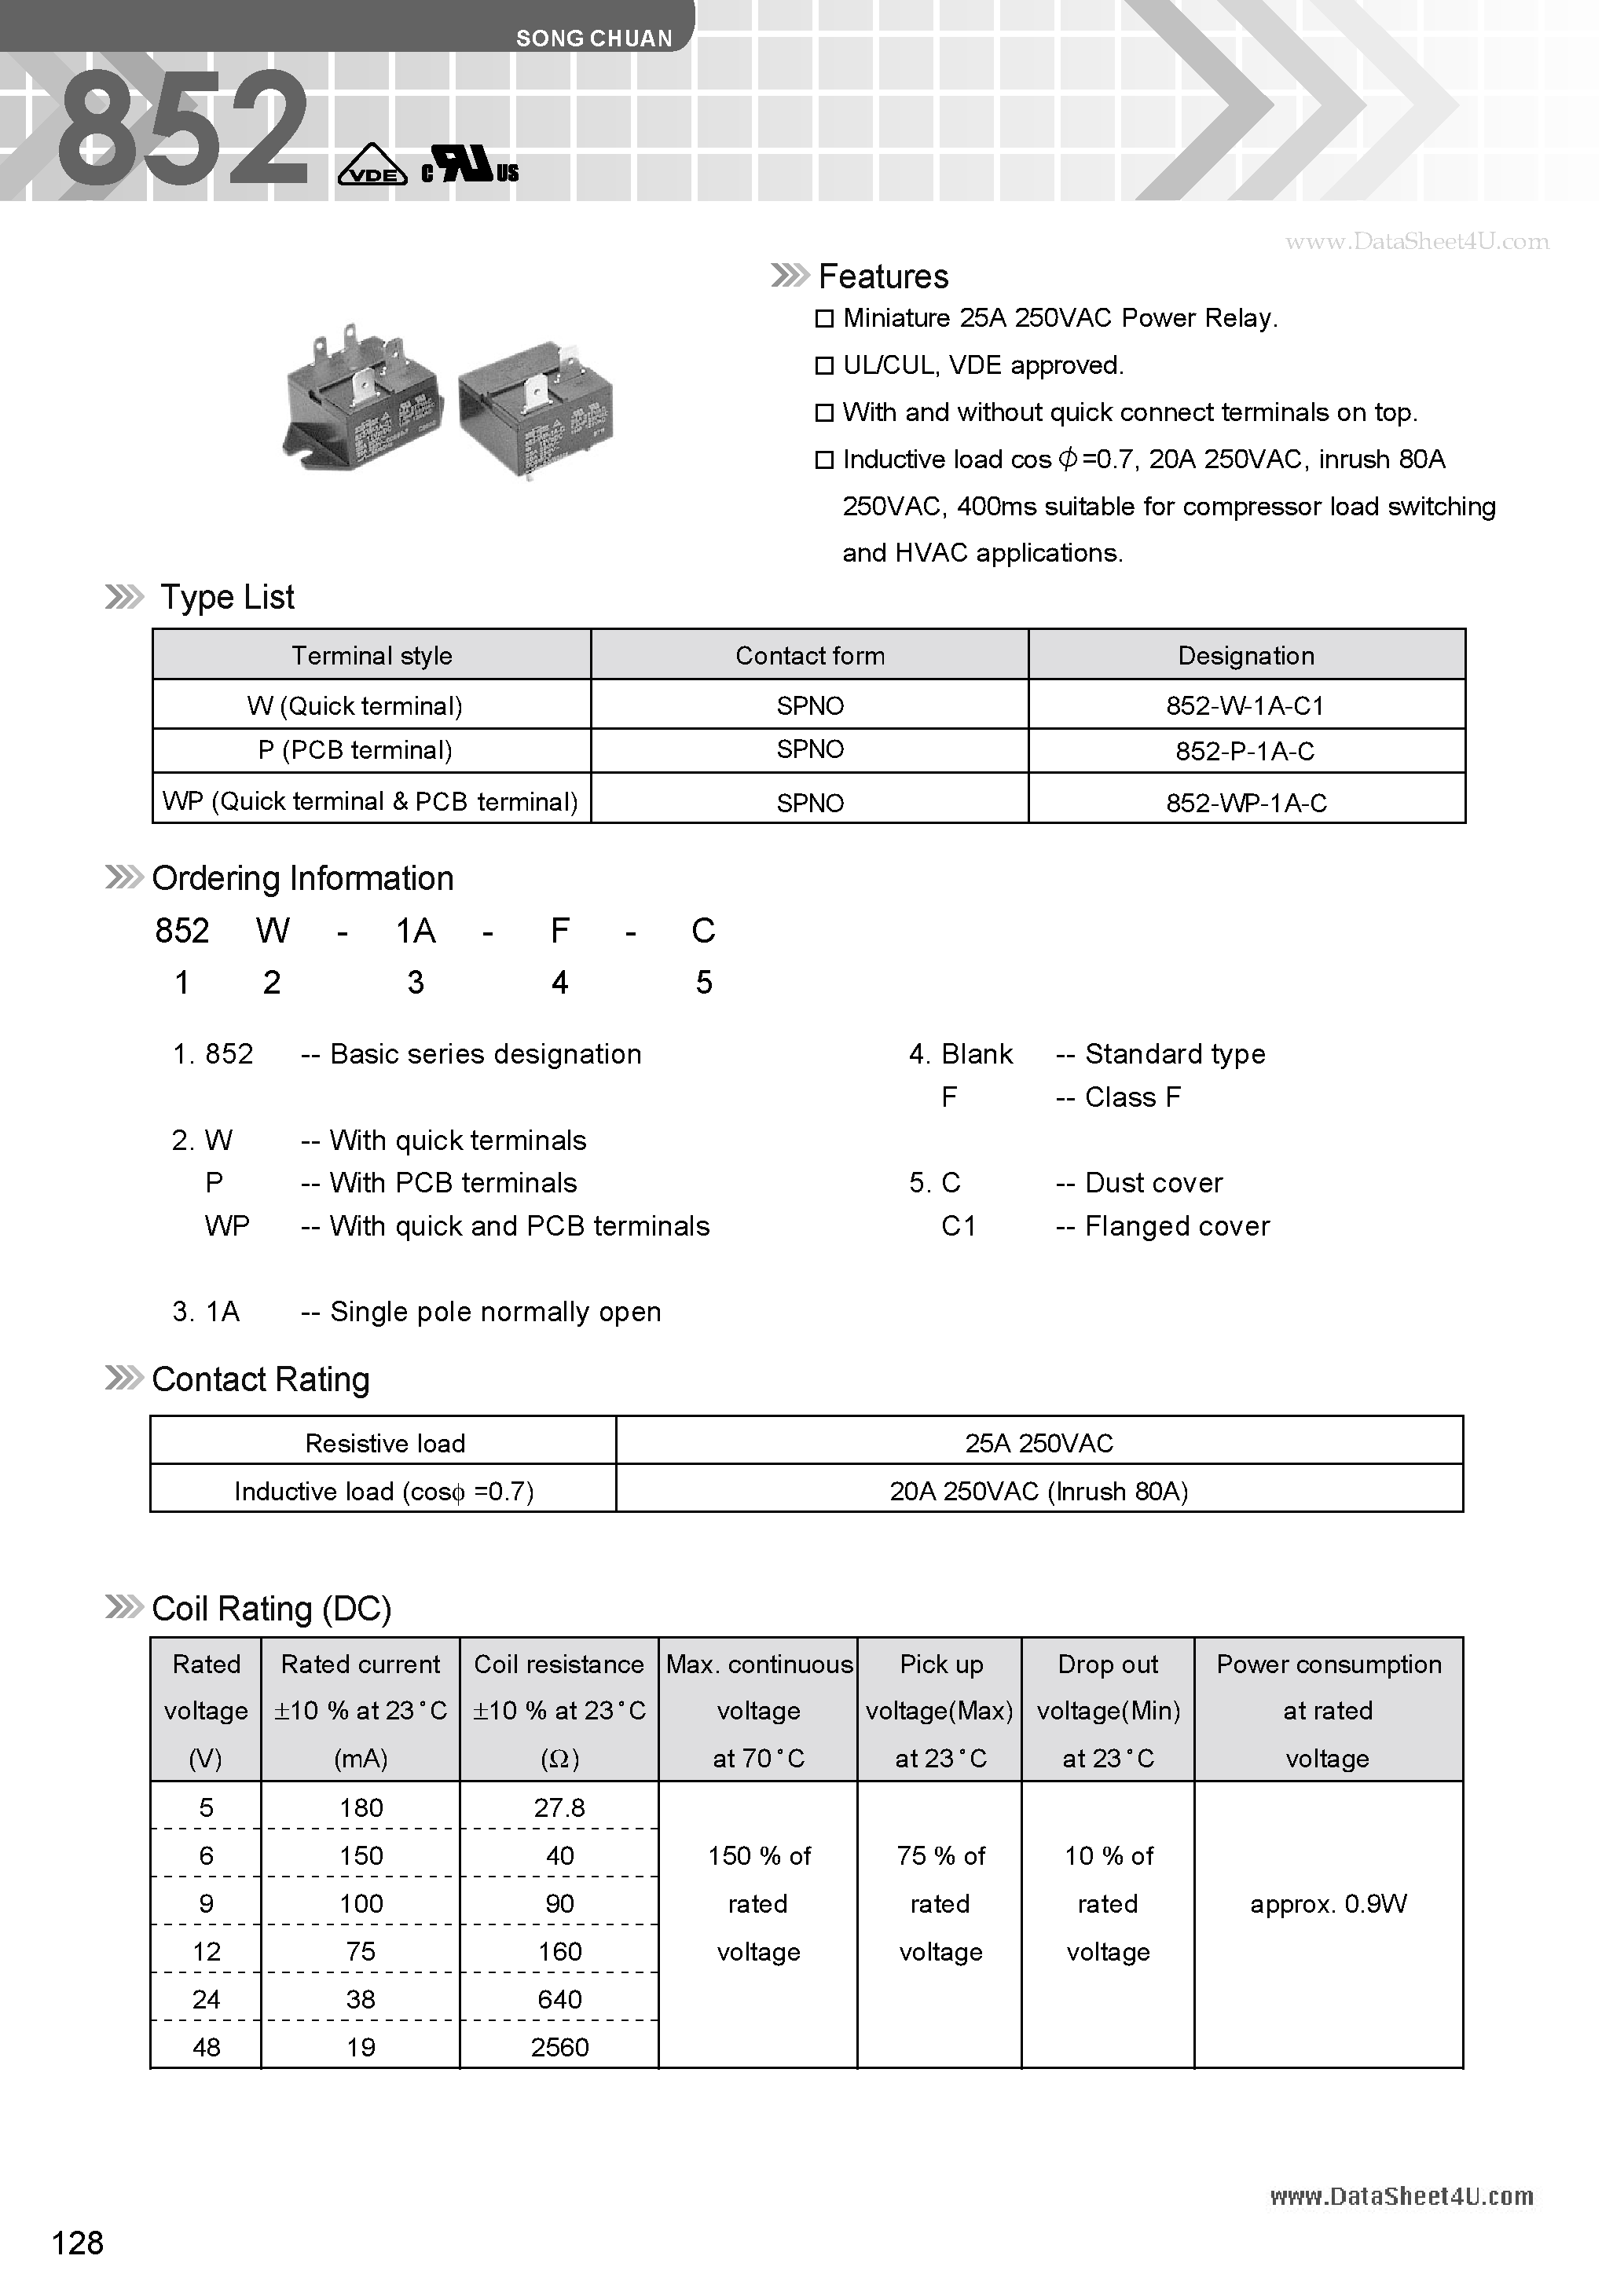 Datasheet 852-P-1A-C - Miniature 25A 250VAC Power Relay page 1